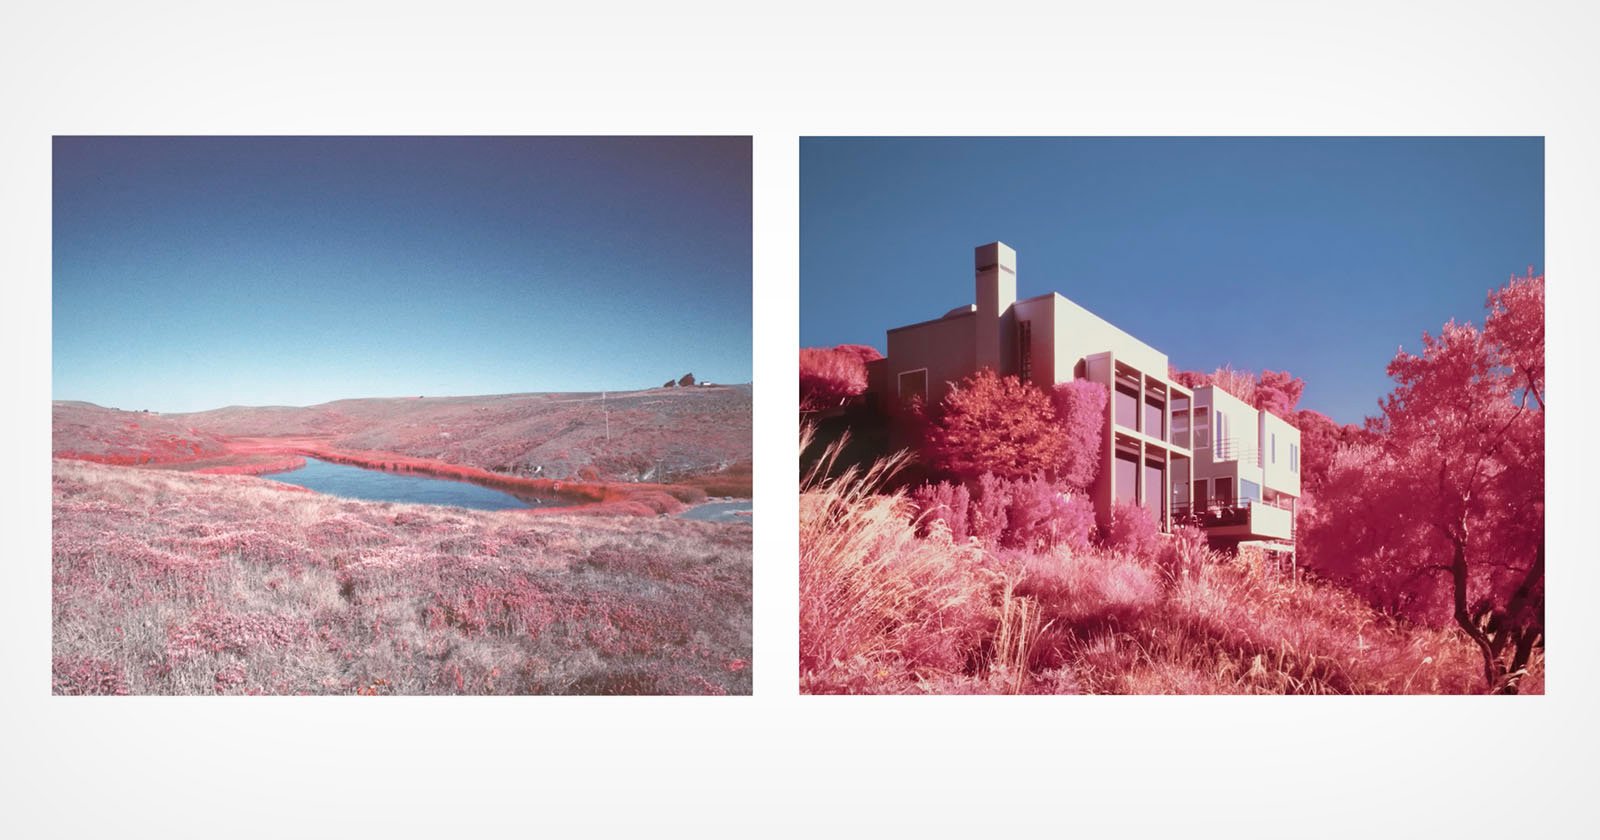 How to Revive the Look and Feel of the Extinct Kodak Aerochrome Film